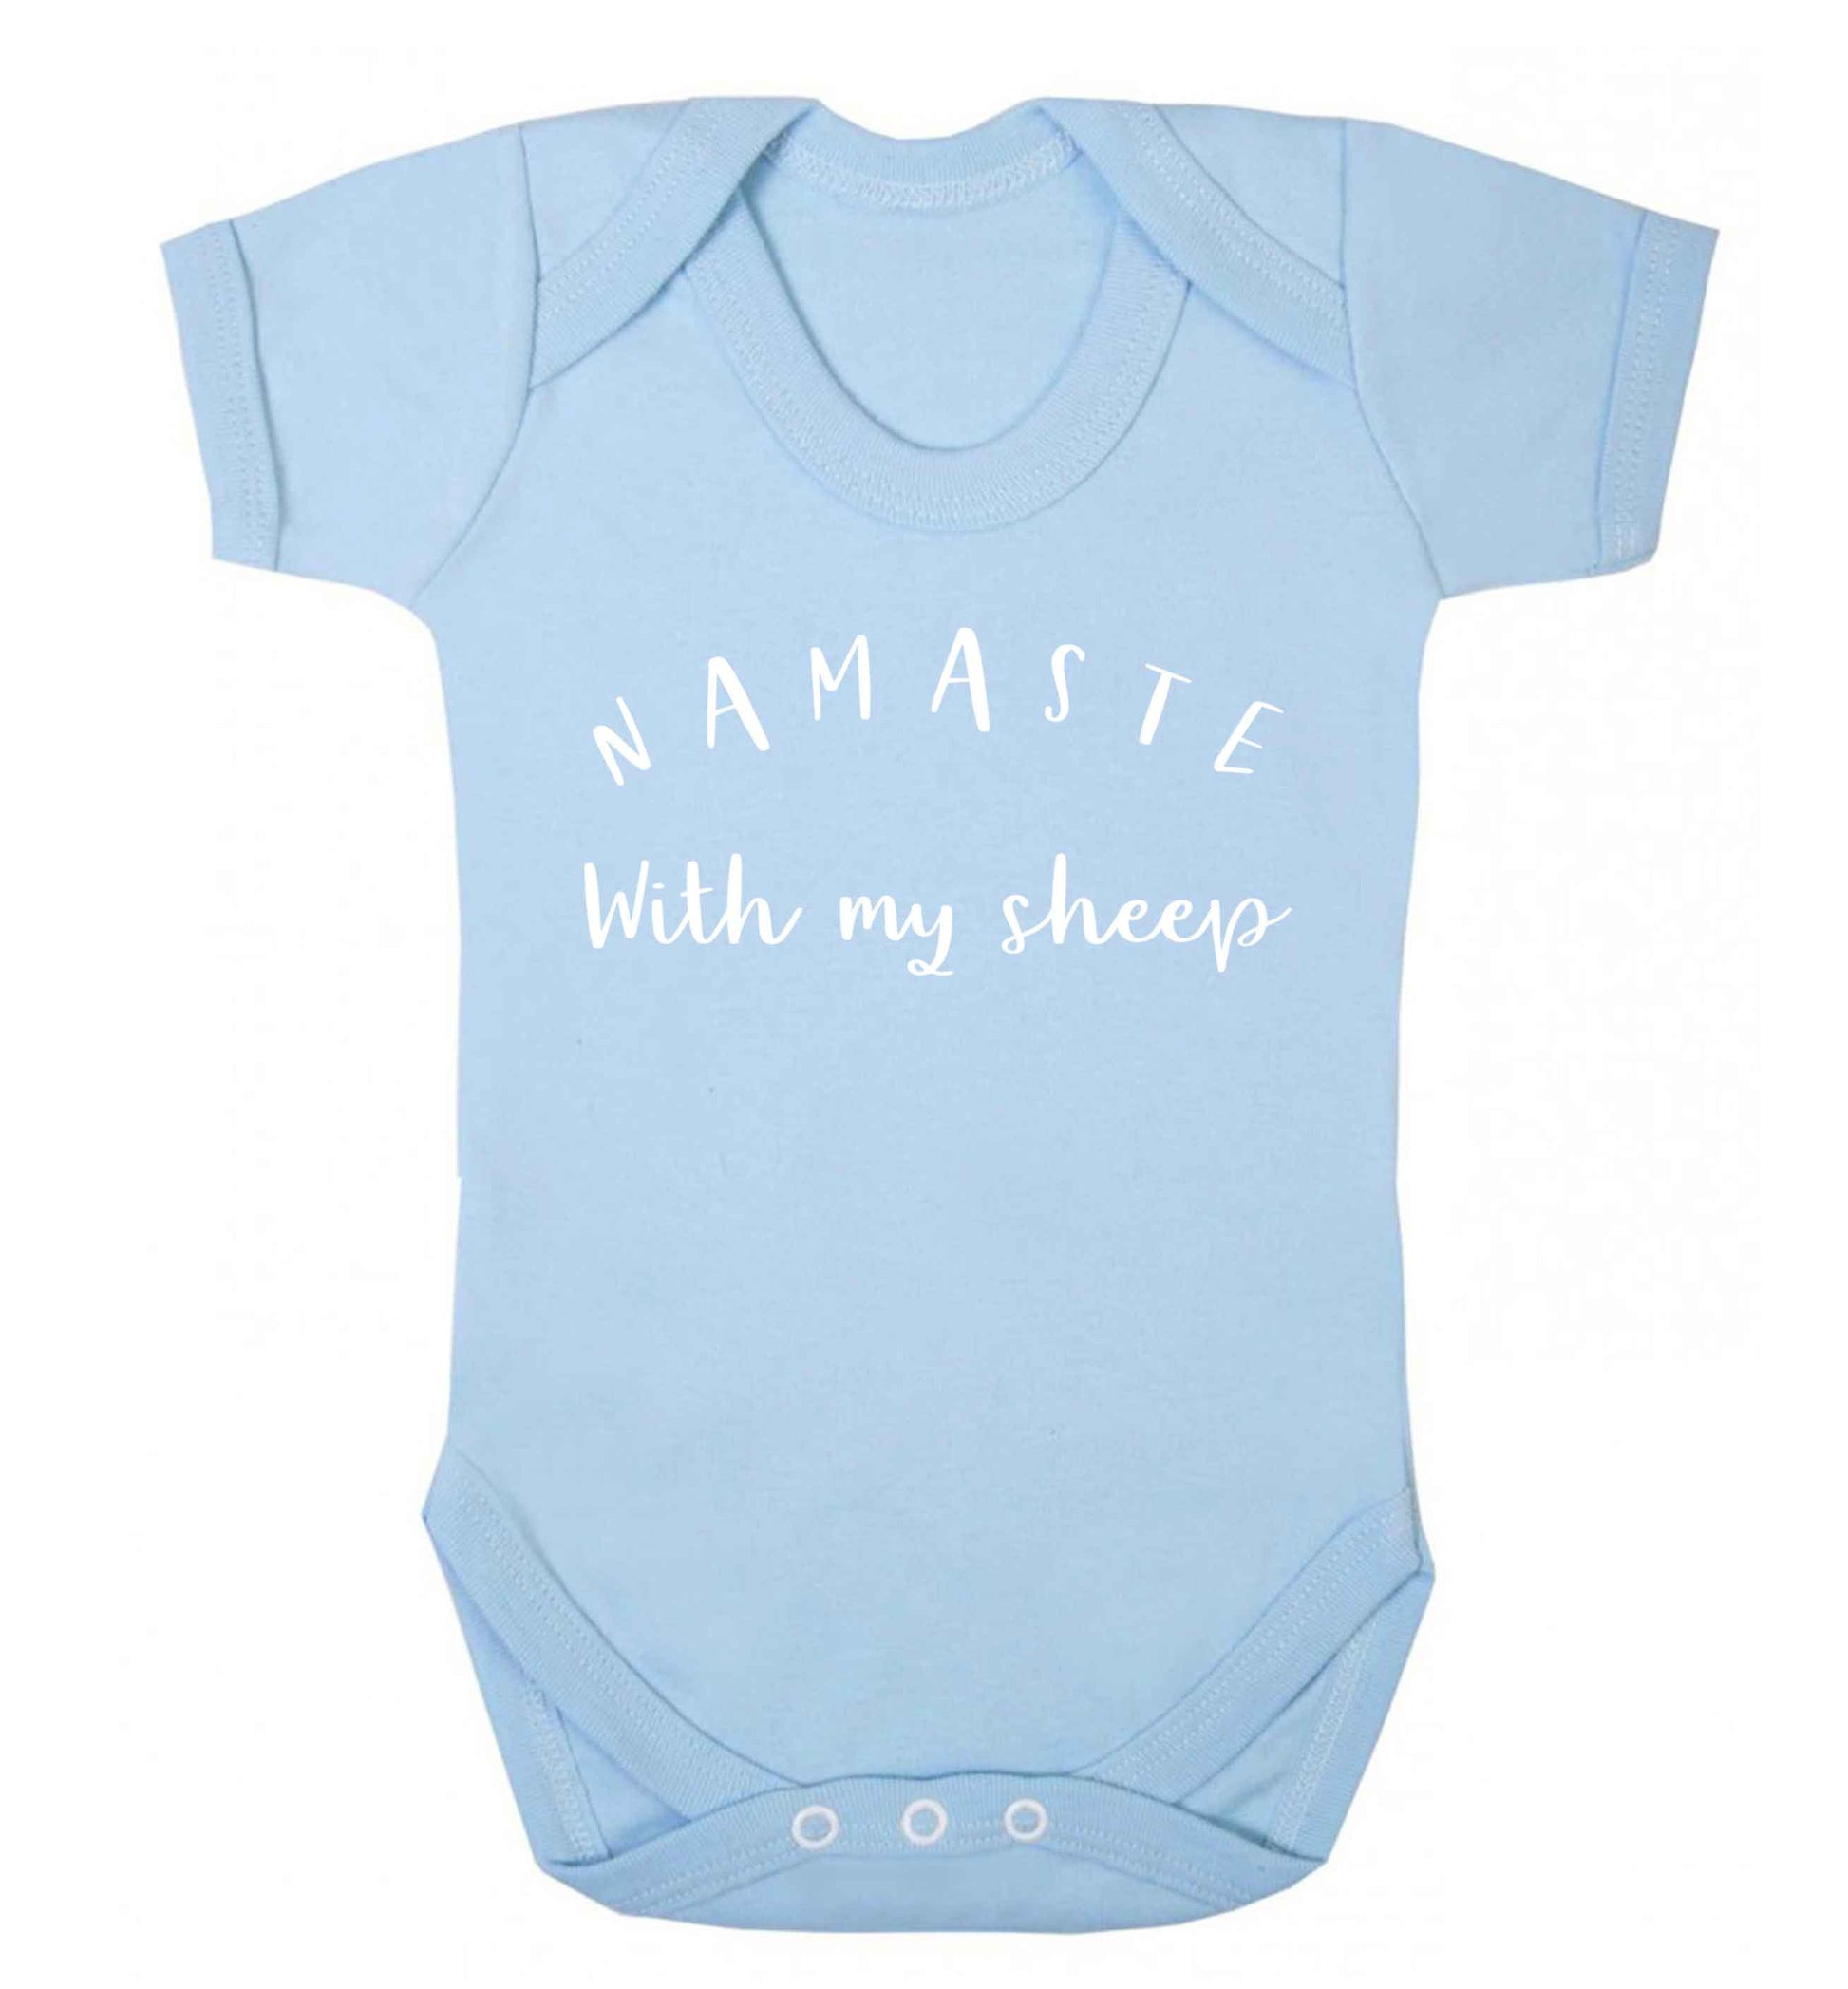 Namaste with my sheep Baby Vest pale blue 18-24 months